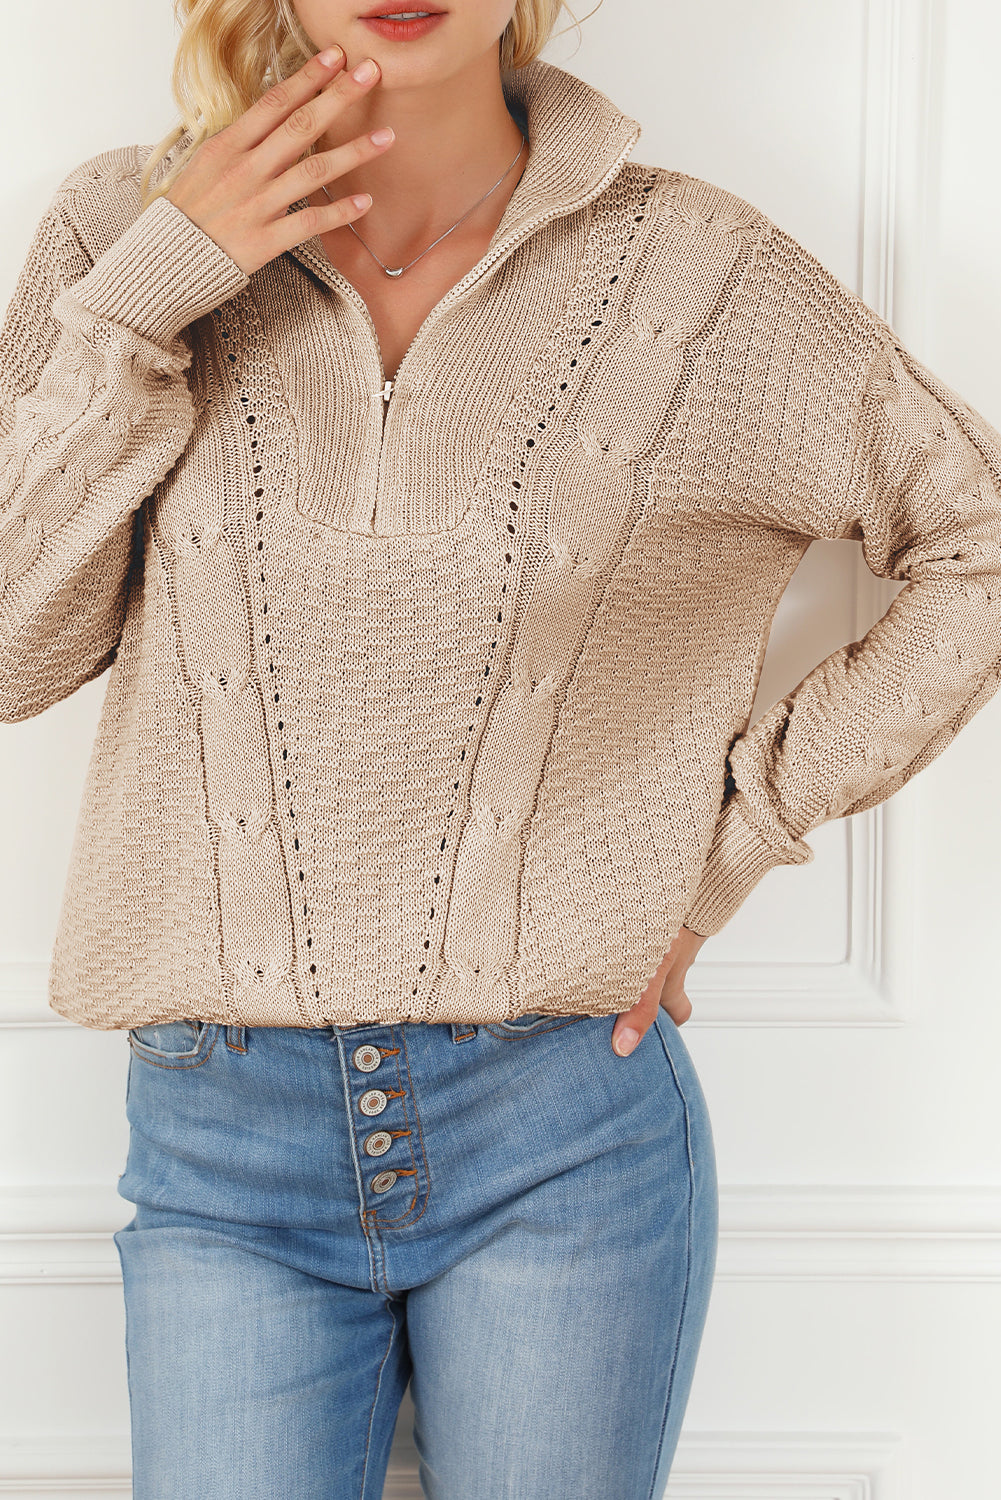 Apricot Zipped Stand Collar Cable Knit Sweater